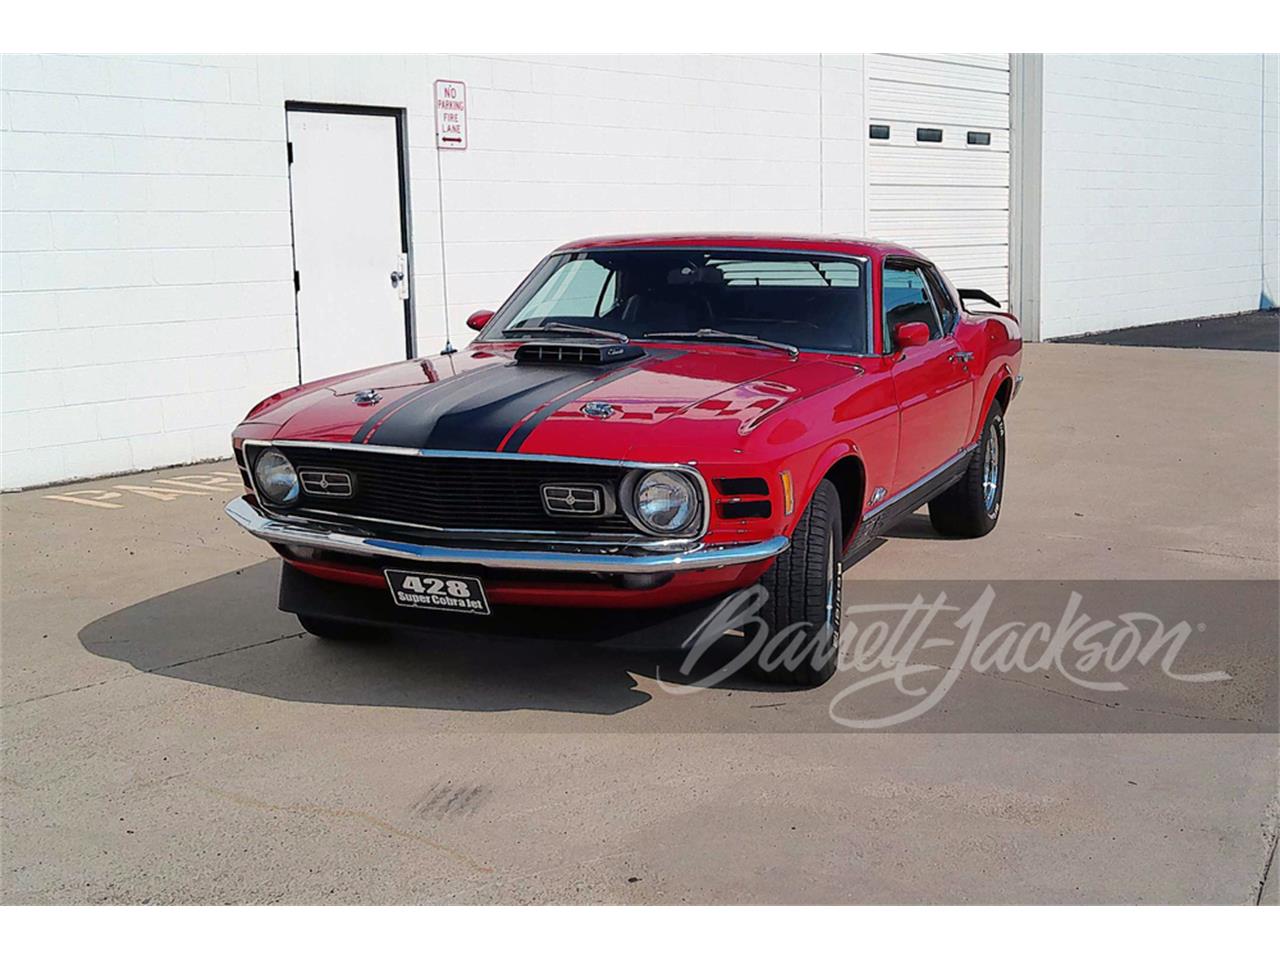 For Sale at Auction: 1970 Ford Mustang in Scottsdale, Arizona for sale in Scottsdale, AZ